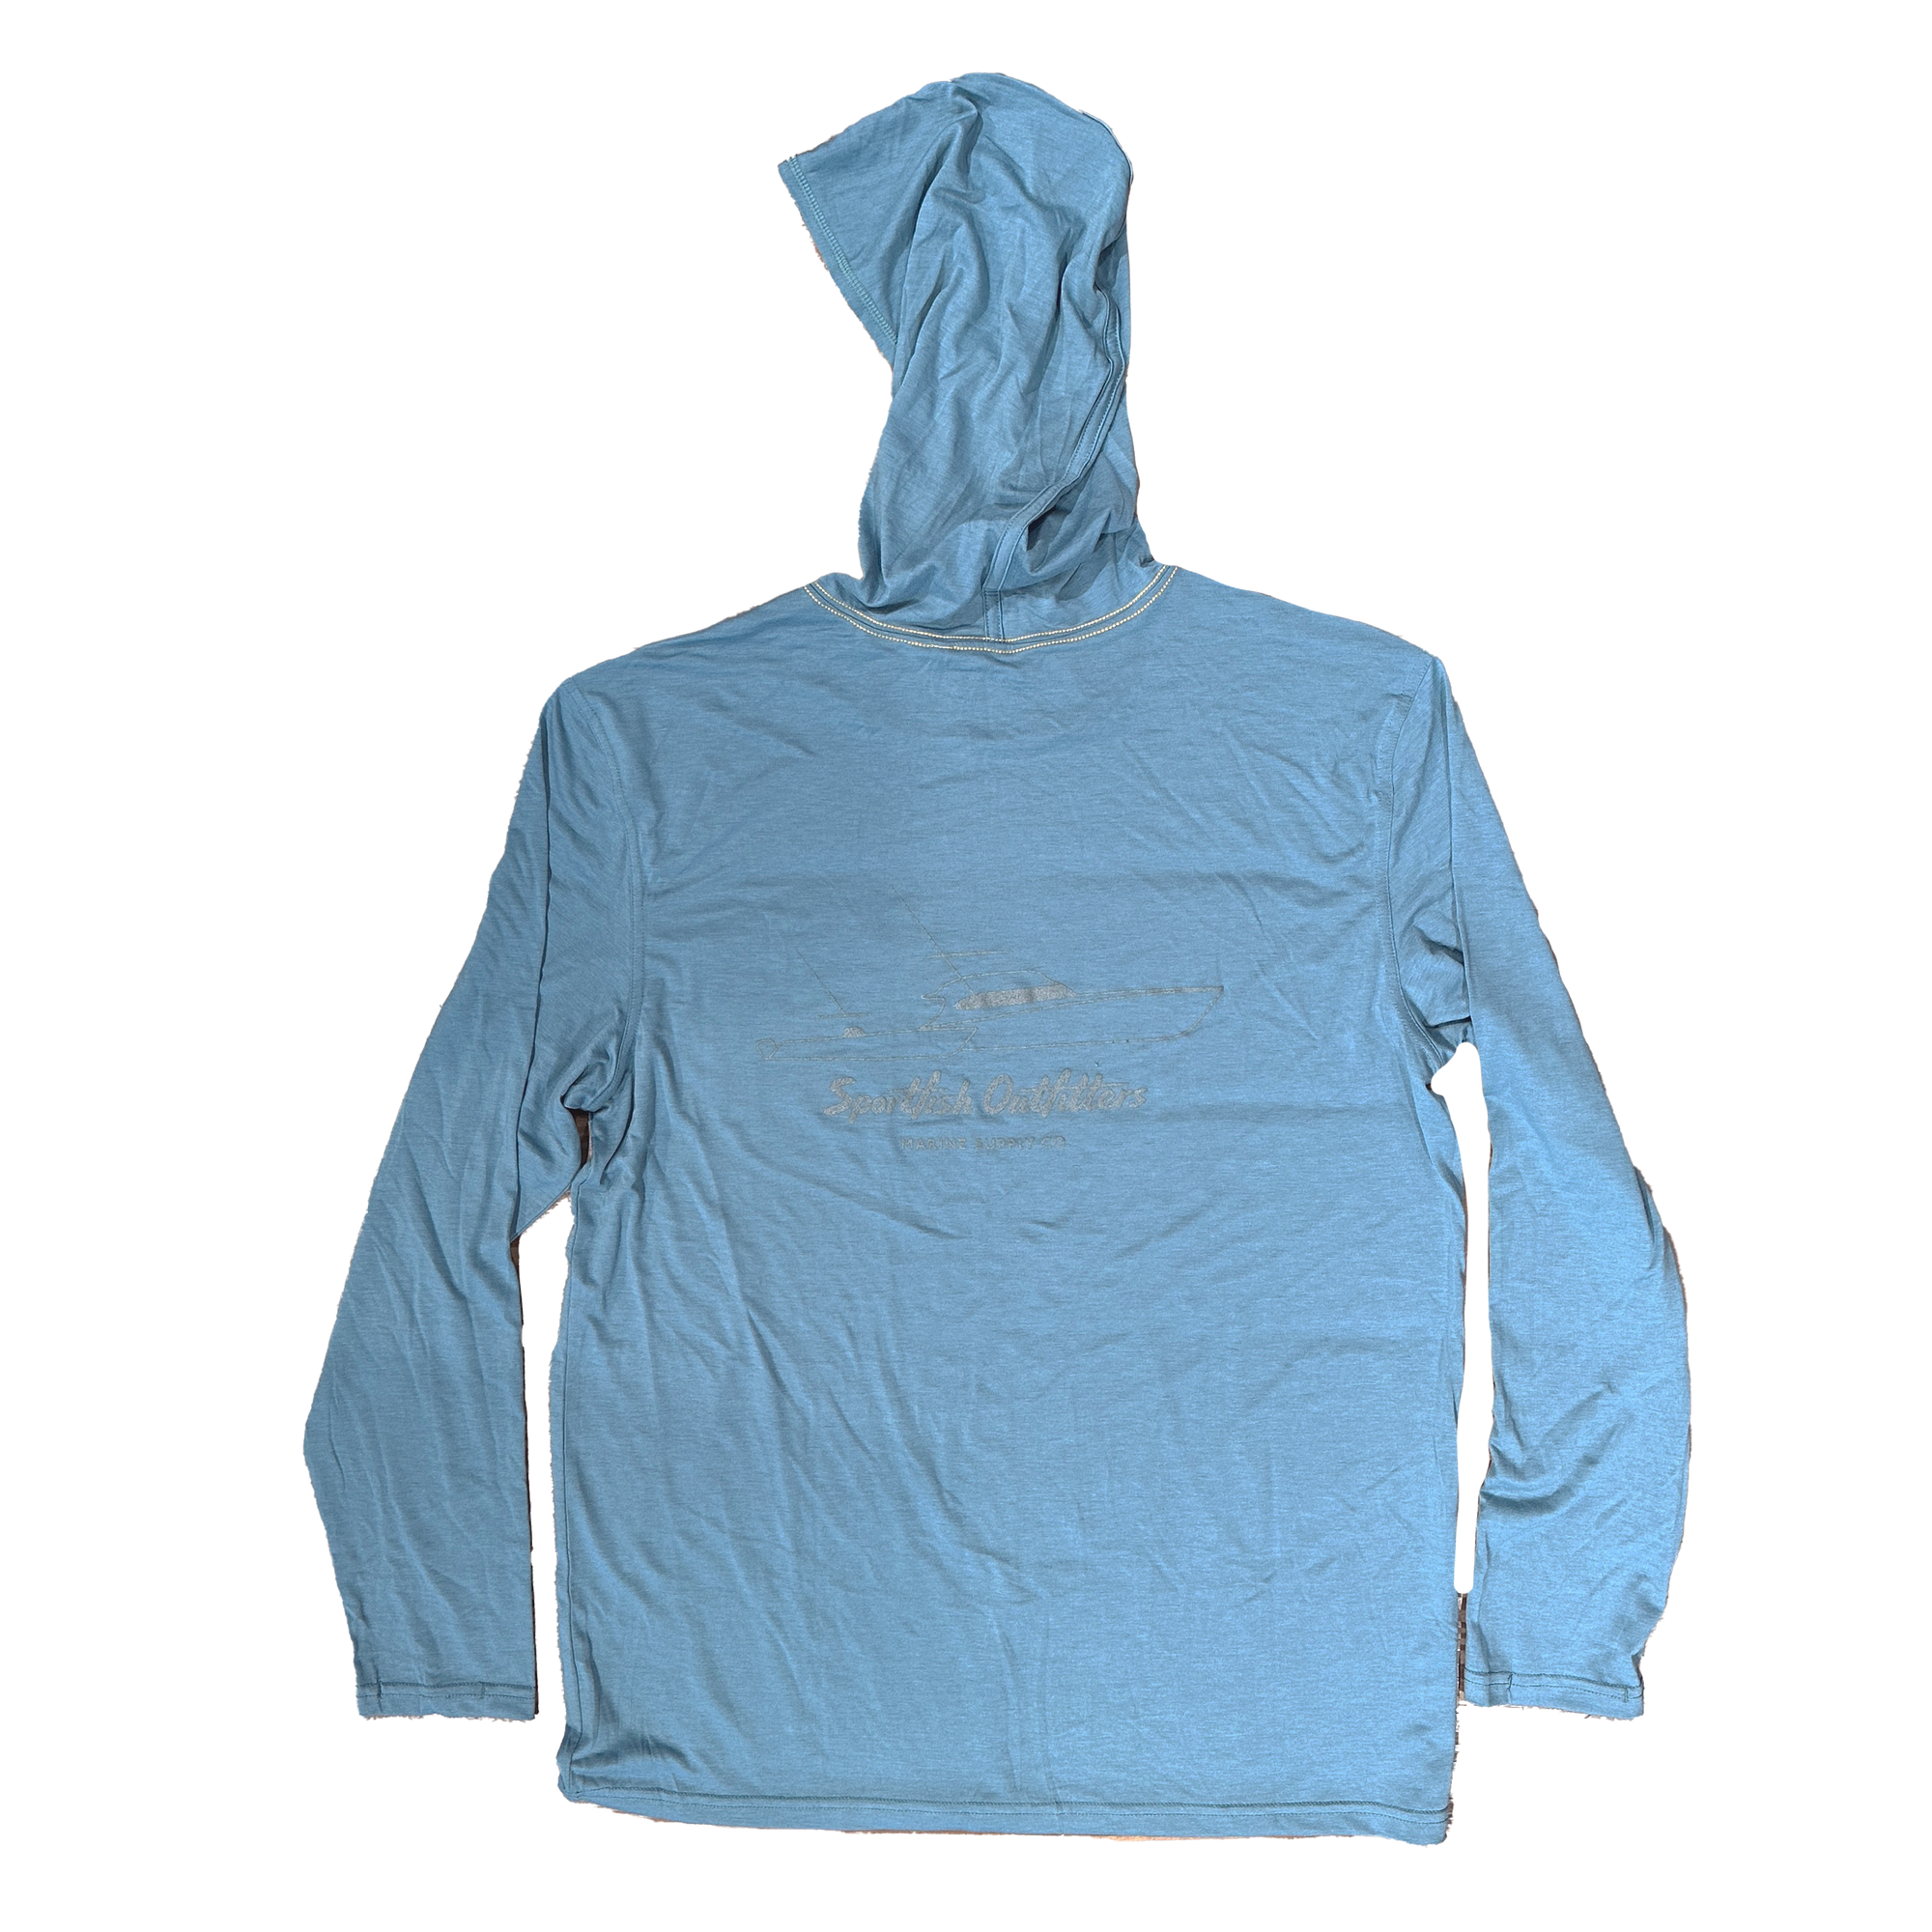 Marsh Wear Pamlico Hooded Sun Shirt with Sportfish Outfitters Logo